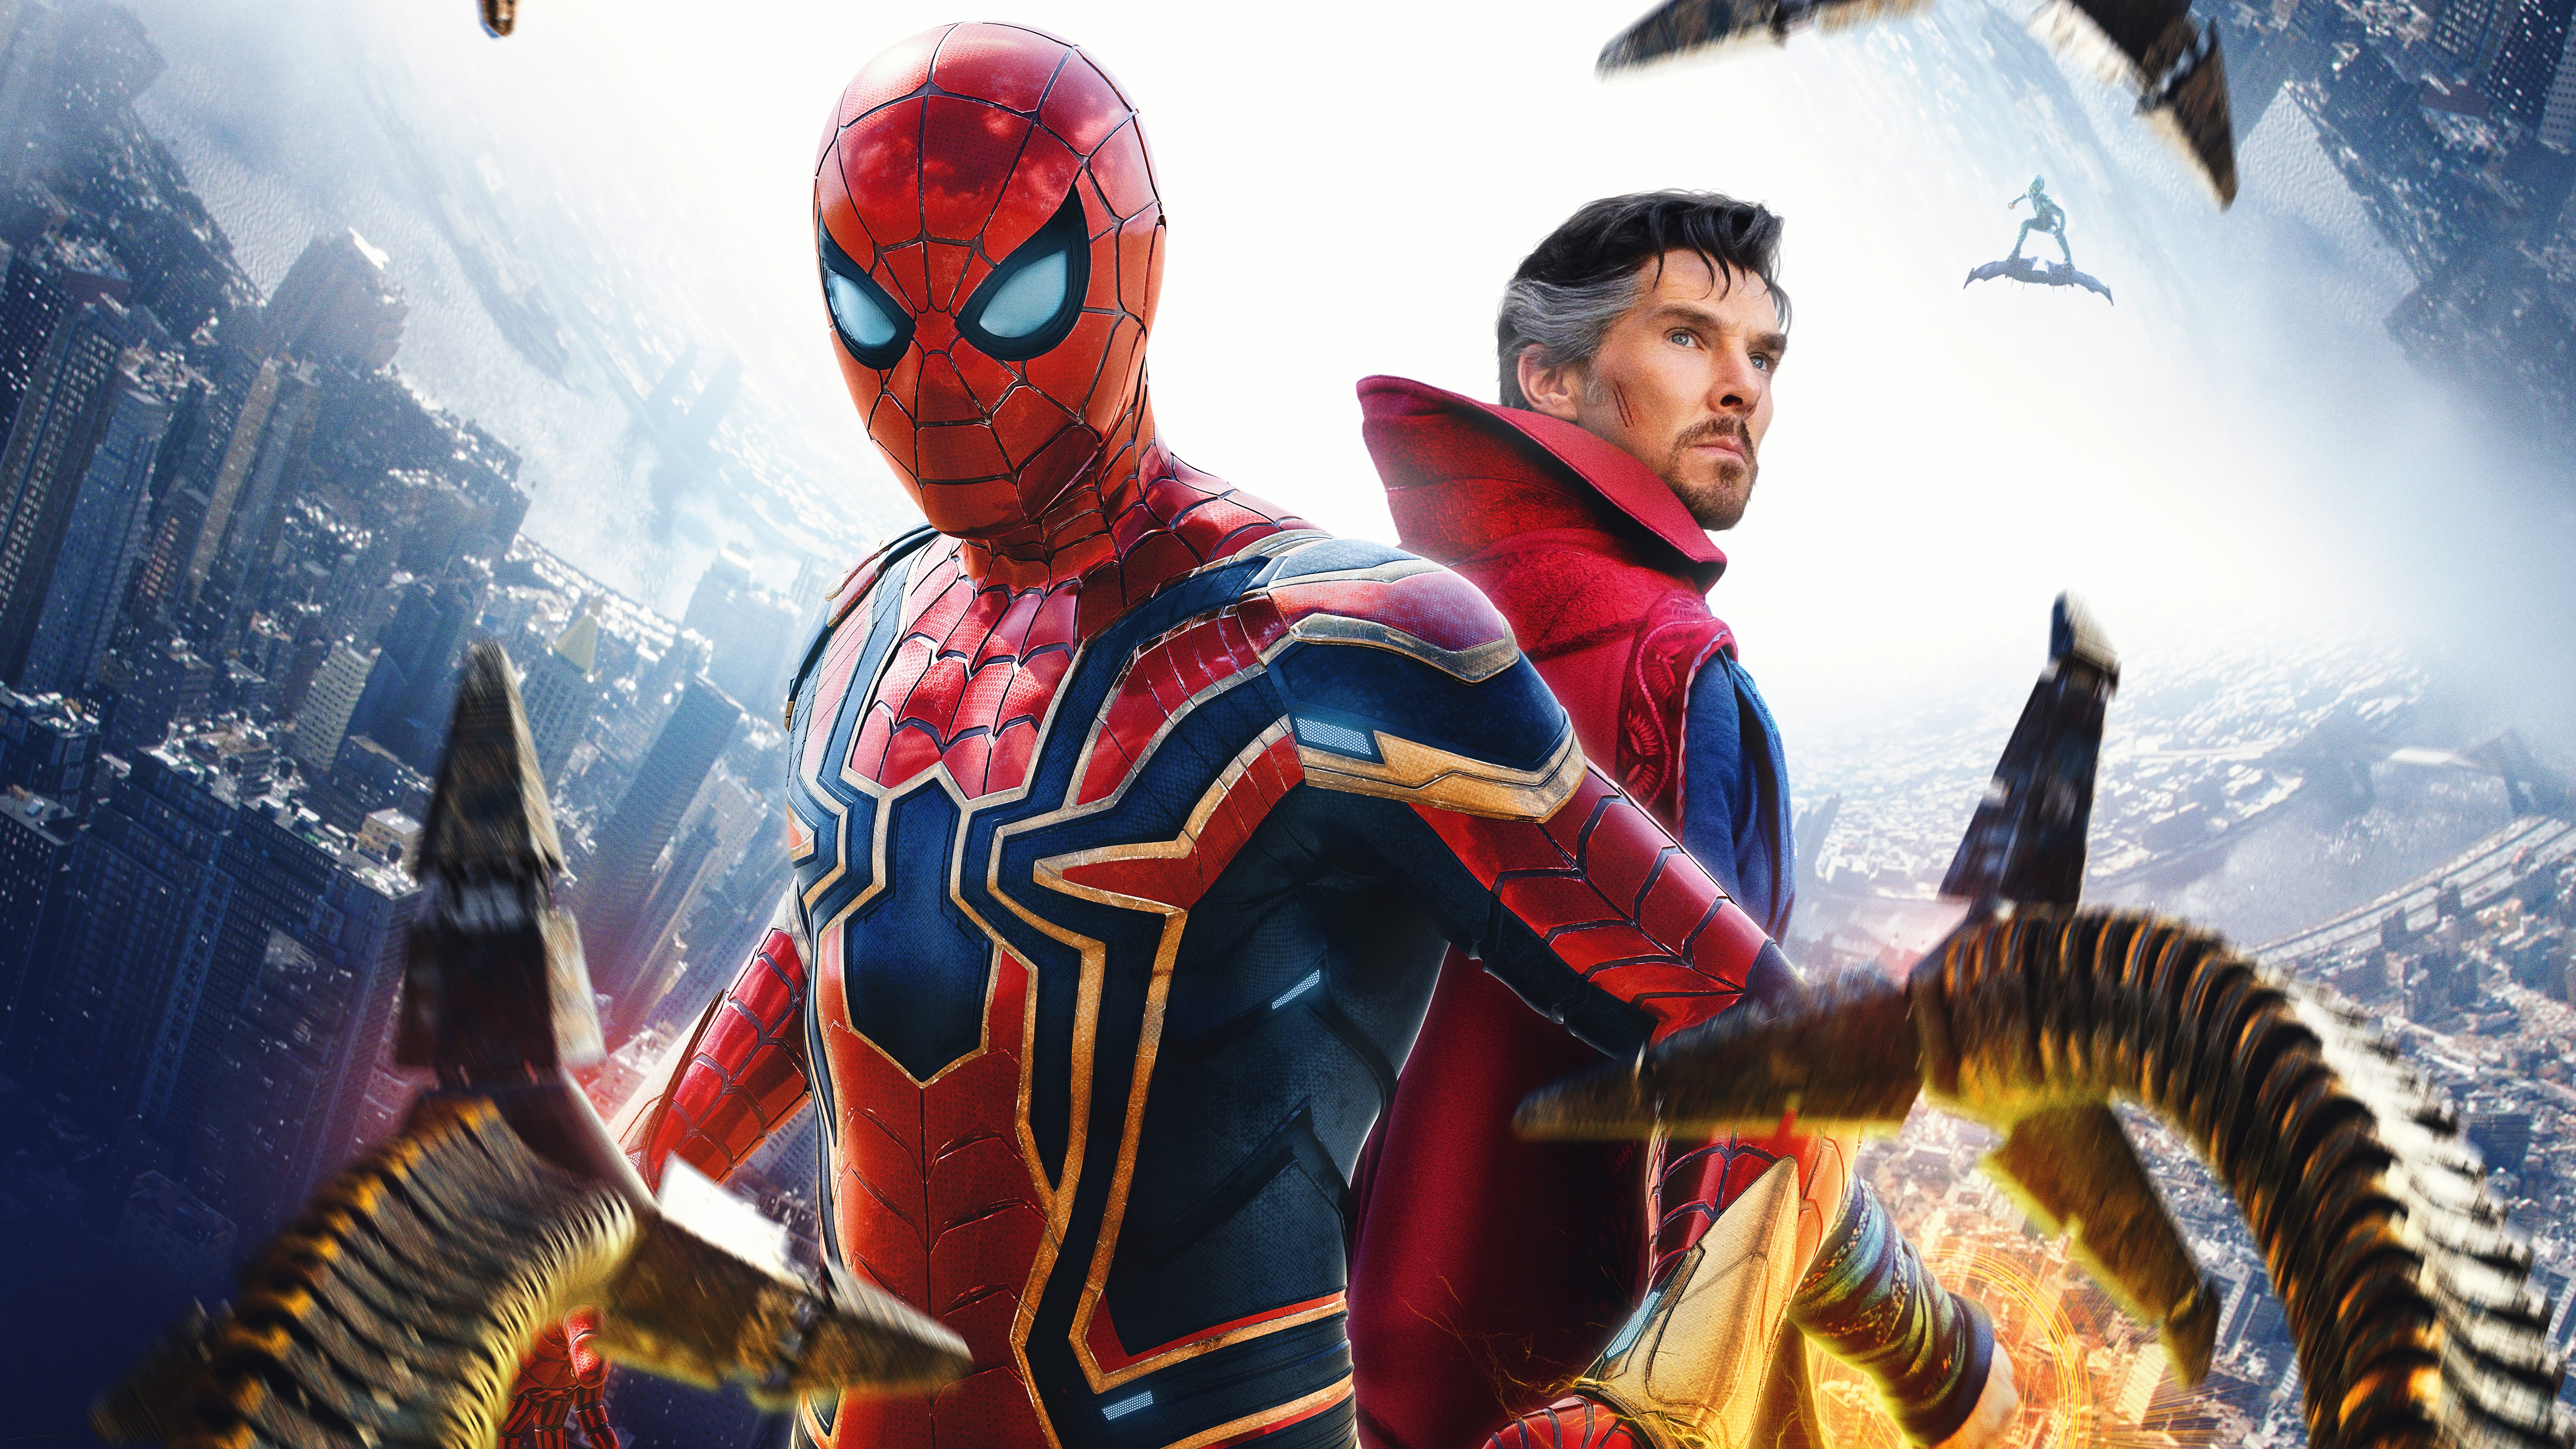 Wallpaper Spider Man and Doctor Strange in No way home